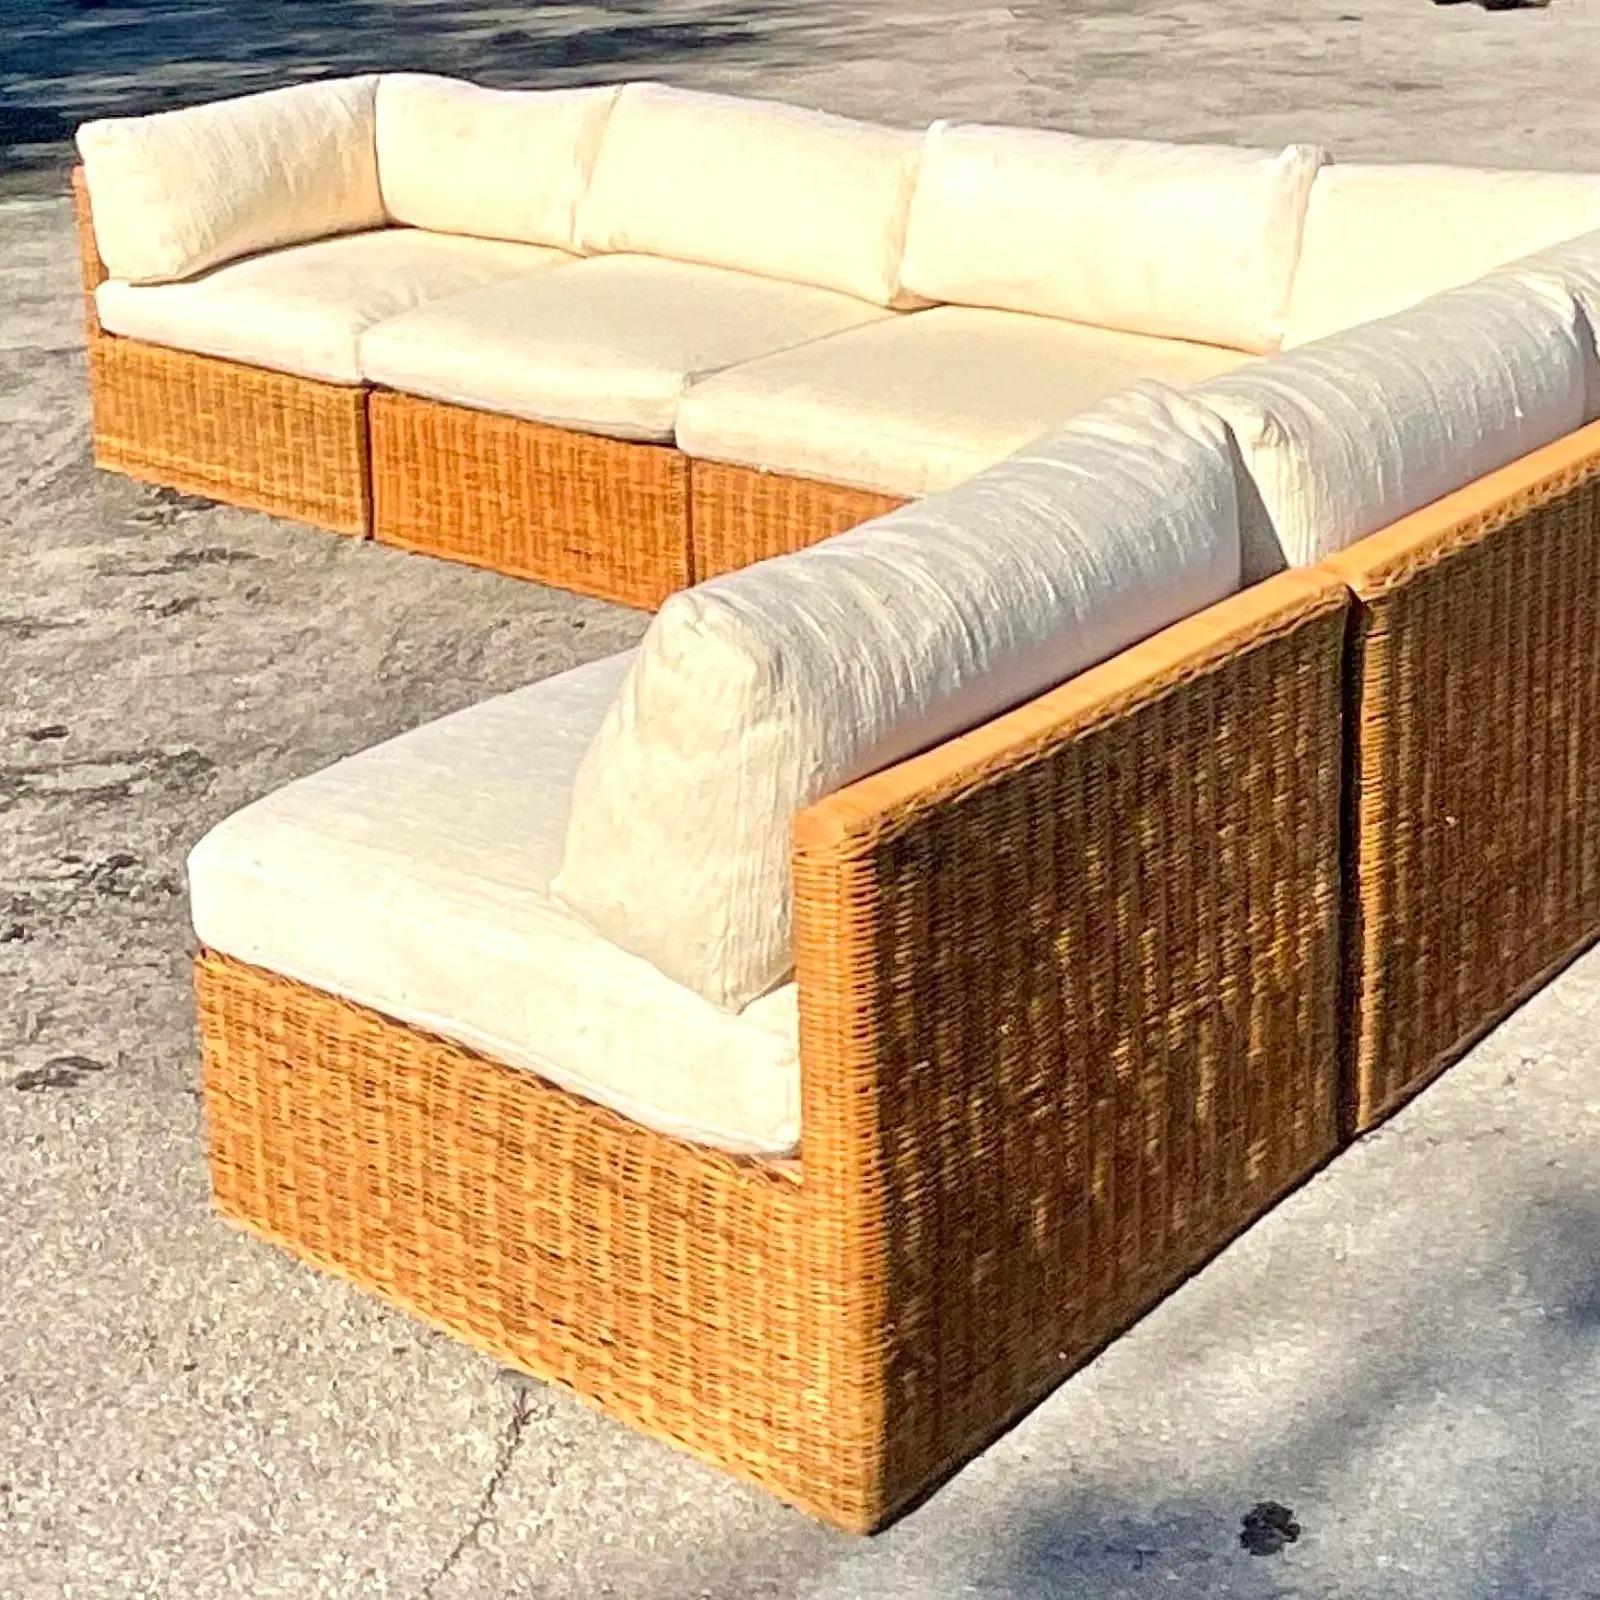 Incredible vintage Coastal sectional sofa. Beautiful woven rattan frame with slubbed cotton in a beautiful ivory. Move around the sections to suit your room. Acquired from a Palm Beach estate.

Each square section is 33 inches. So the return two